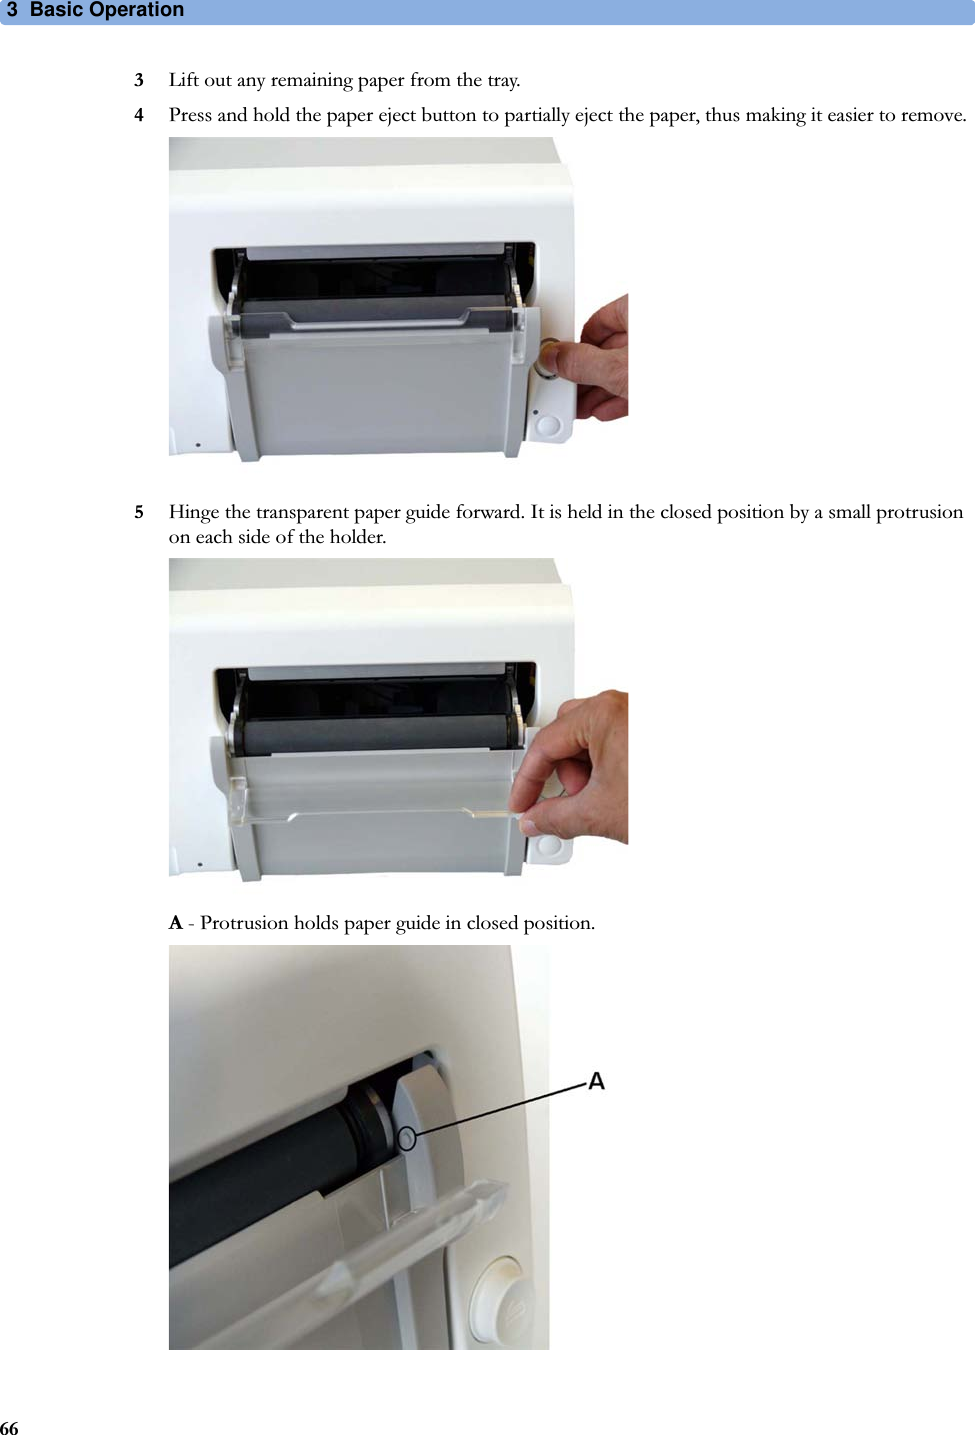 3  Basic Operation663Lift out any remaining paper from the tray.4Press and hold the paper eject button to partially eject the paper, thus making it easier to remove.5Hinge the transparent paper guide forward. It is held in the closed position by a small protrusion on each side of the holder.A - Protrusion holds paper guide in closed position.